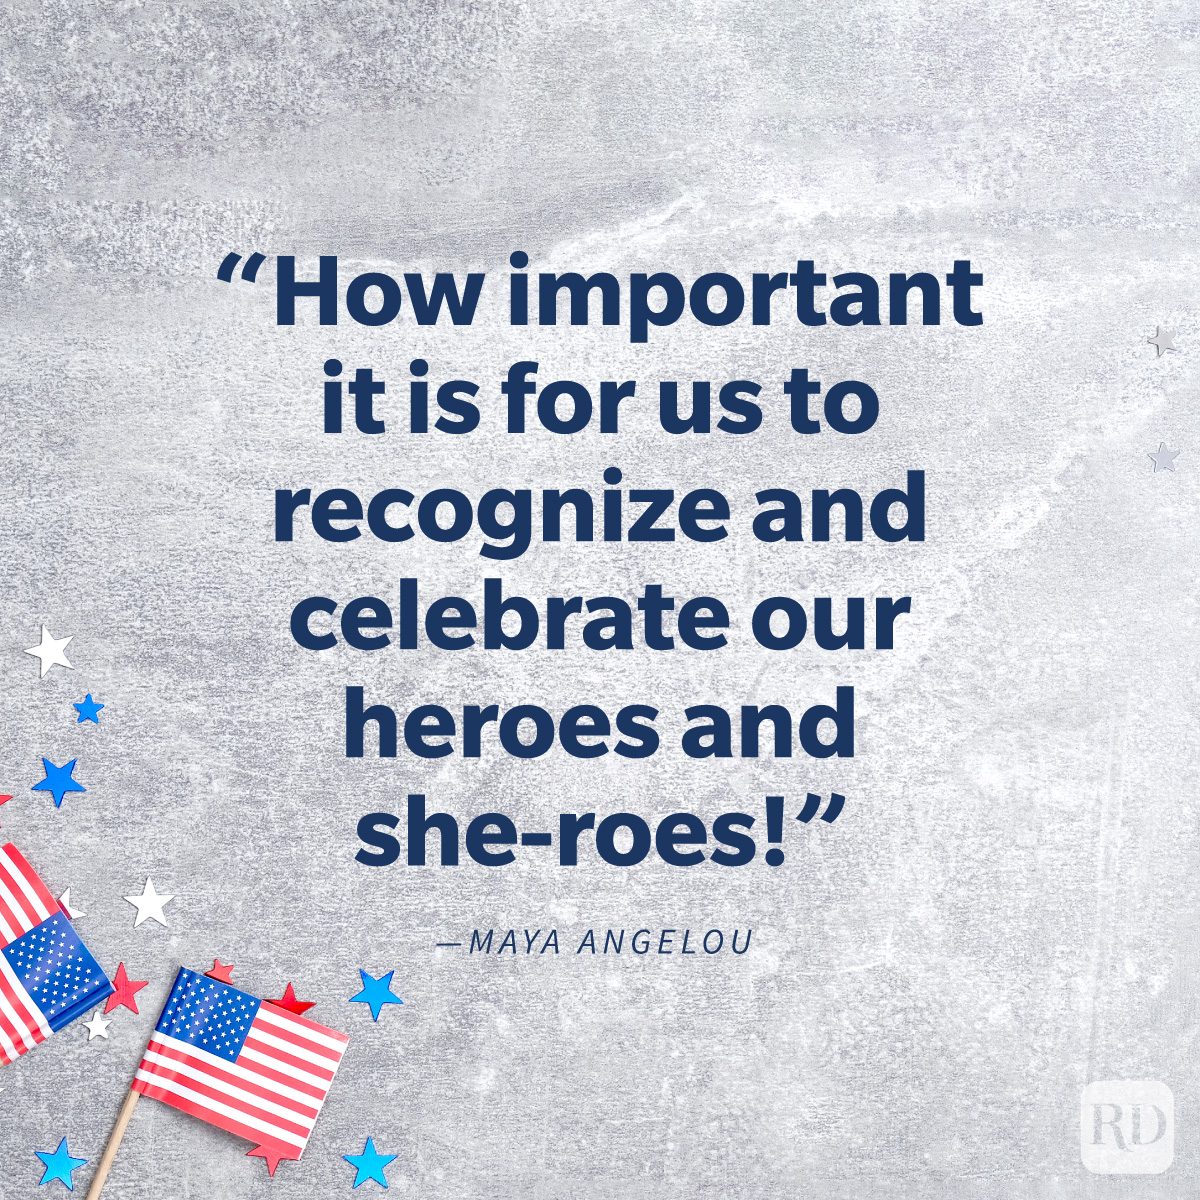 Memorial Day Quotes To Share In Honor And Remembrance “How important it is for us to recognize and celebrate our heroes and she-roes!” by MAYA ANGELOU on background of flags and confetti stars on concrete stone